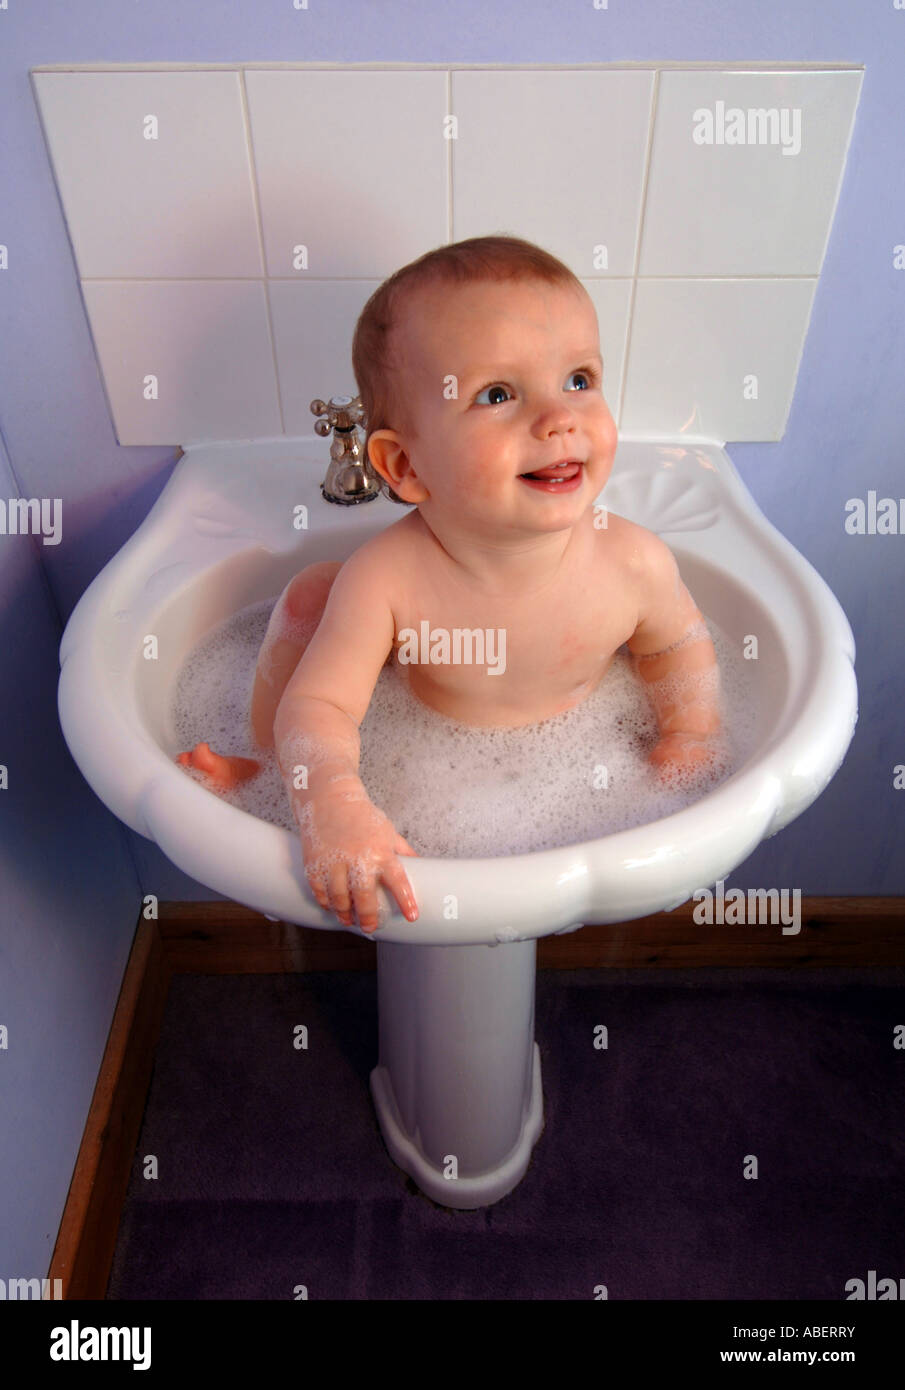 Baby Having A Wash In A Bathroom Sink Stock Photo 12871886